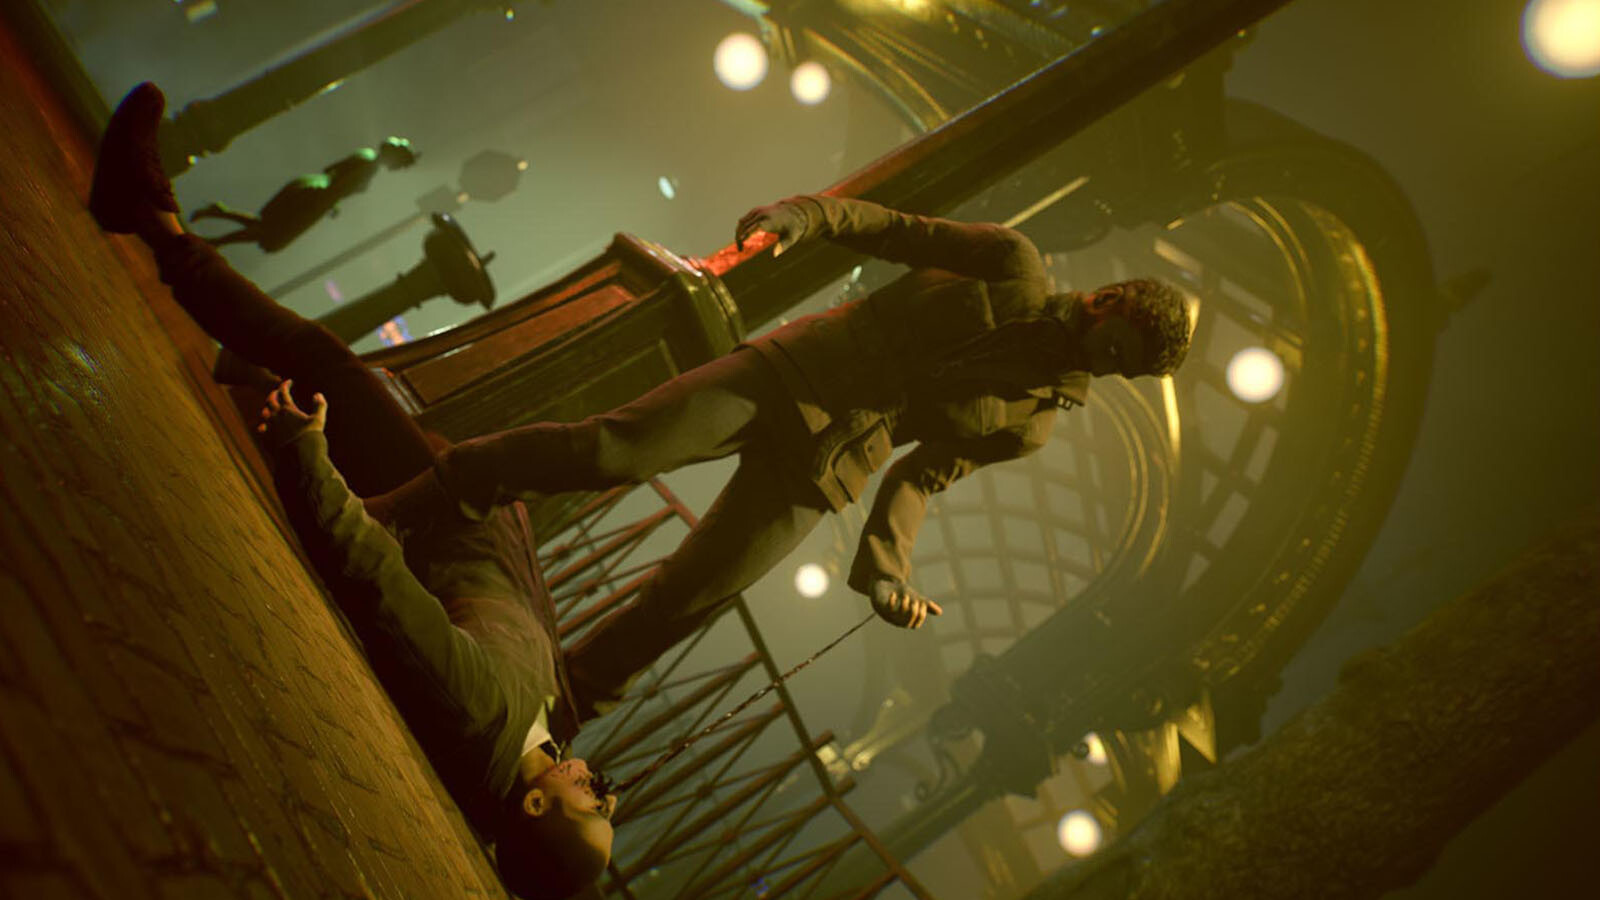 Vampires: The Masquerade - Bloodlines 2 coming March 2020. Pre-order today!  - News - Gamesplanet.com